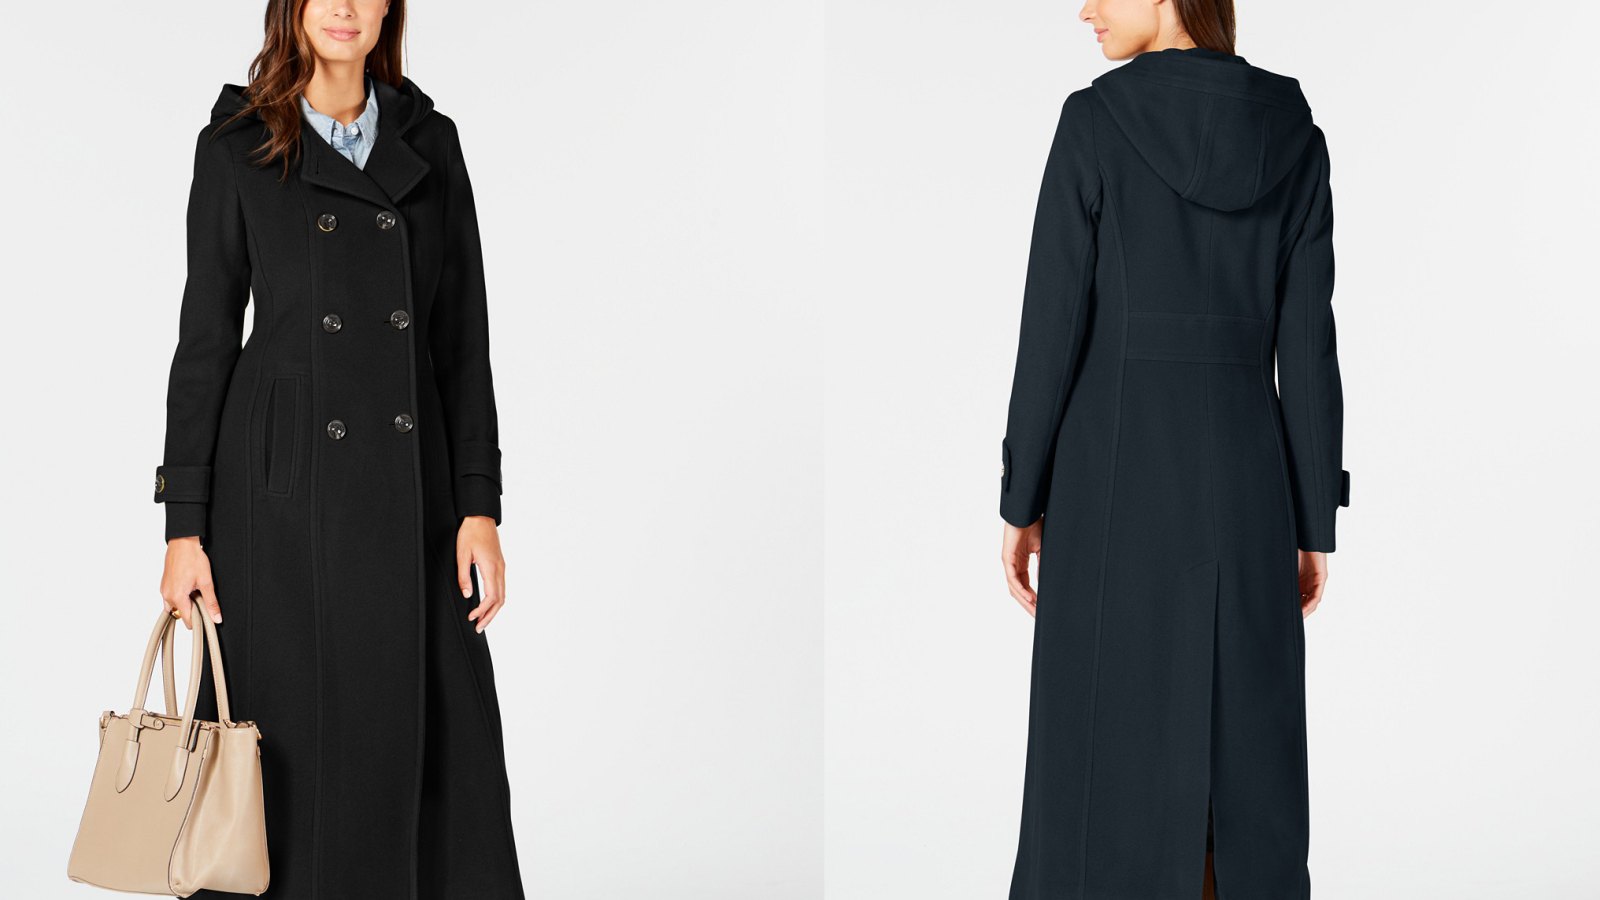 Anne Klein Double-Breasted Hooded Coat (Black/Navy)